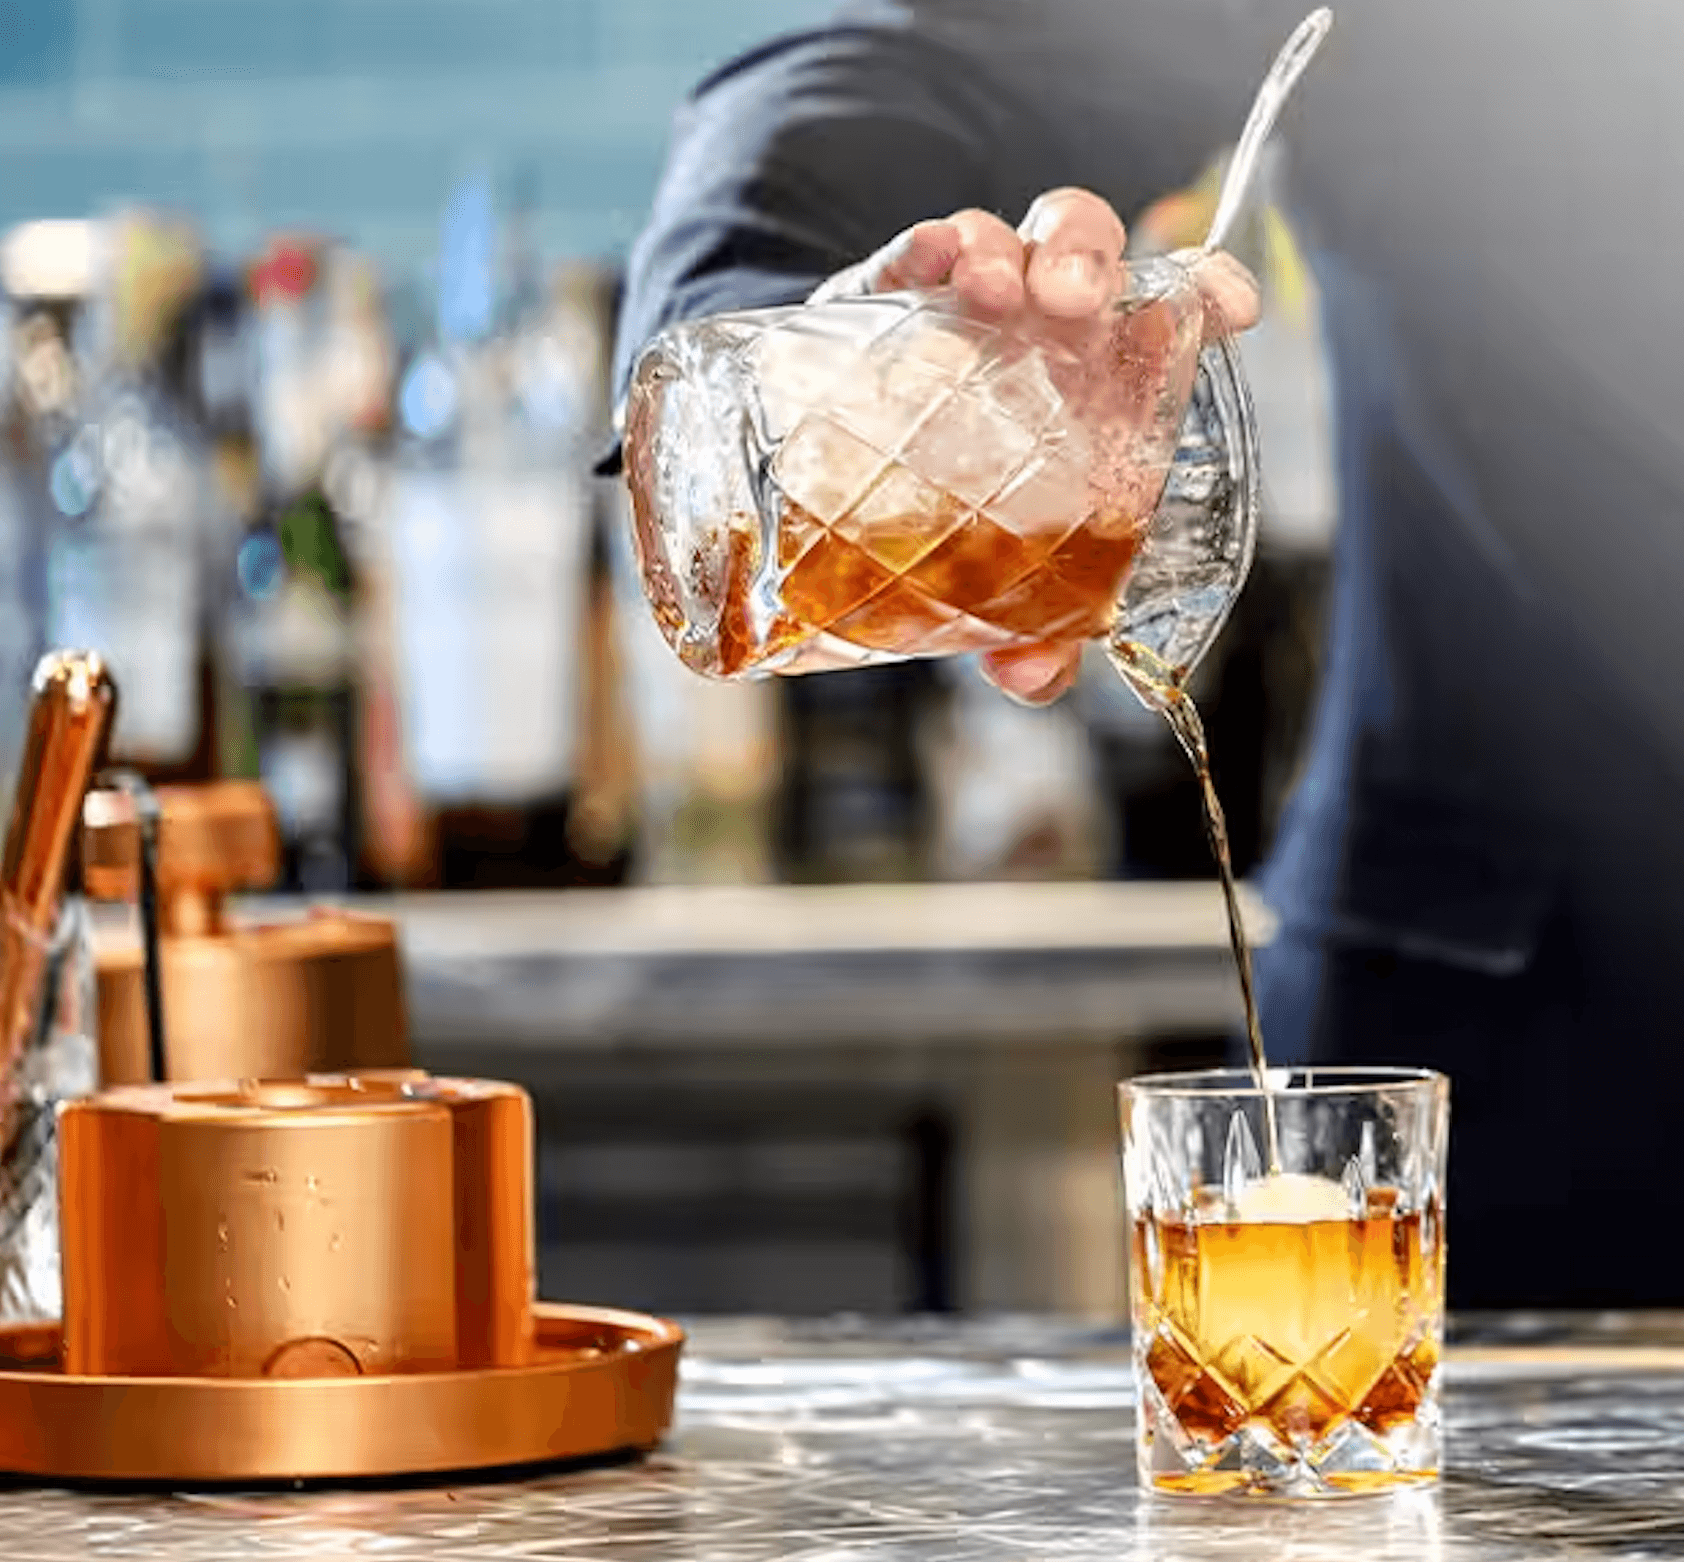 Mixology classes are available onboard